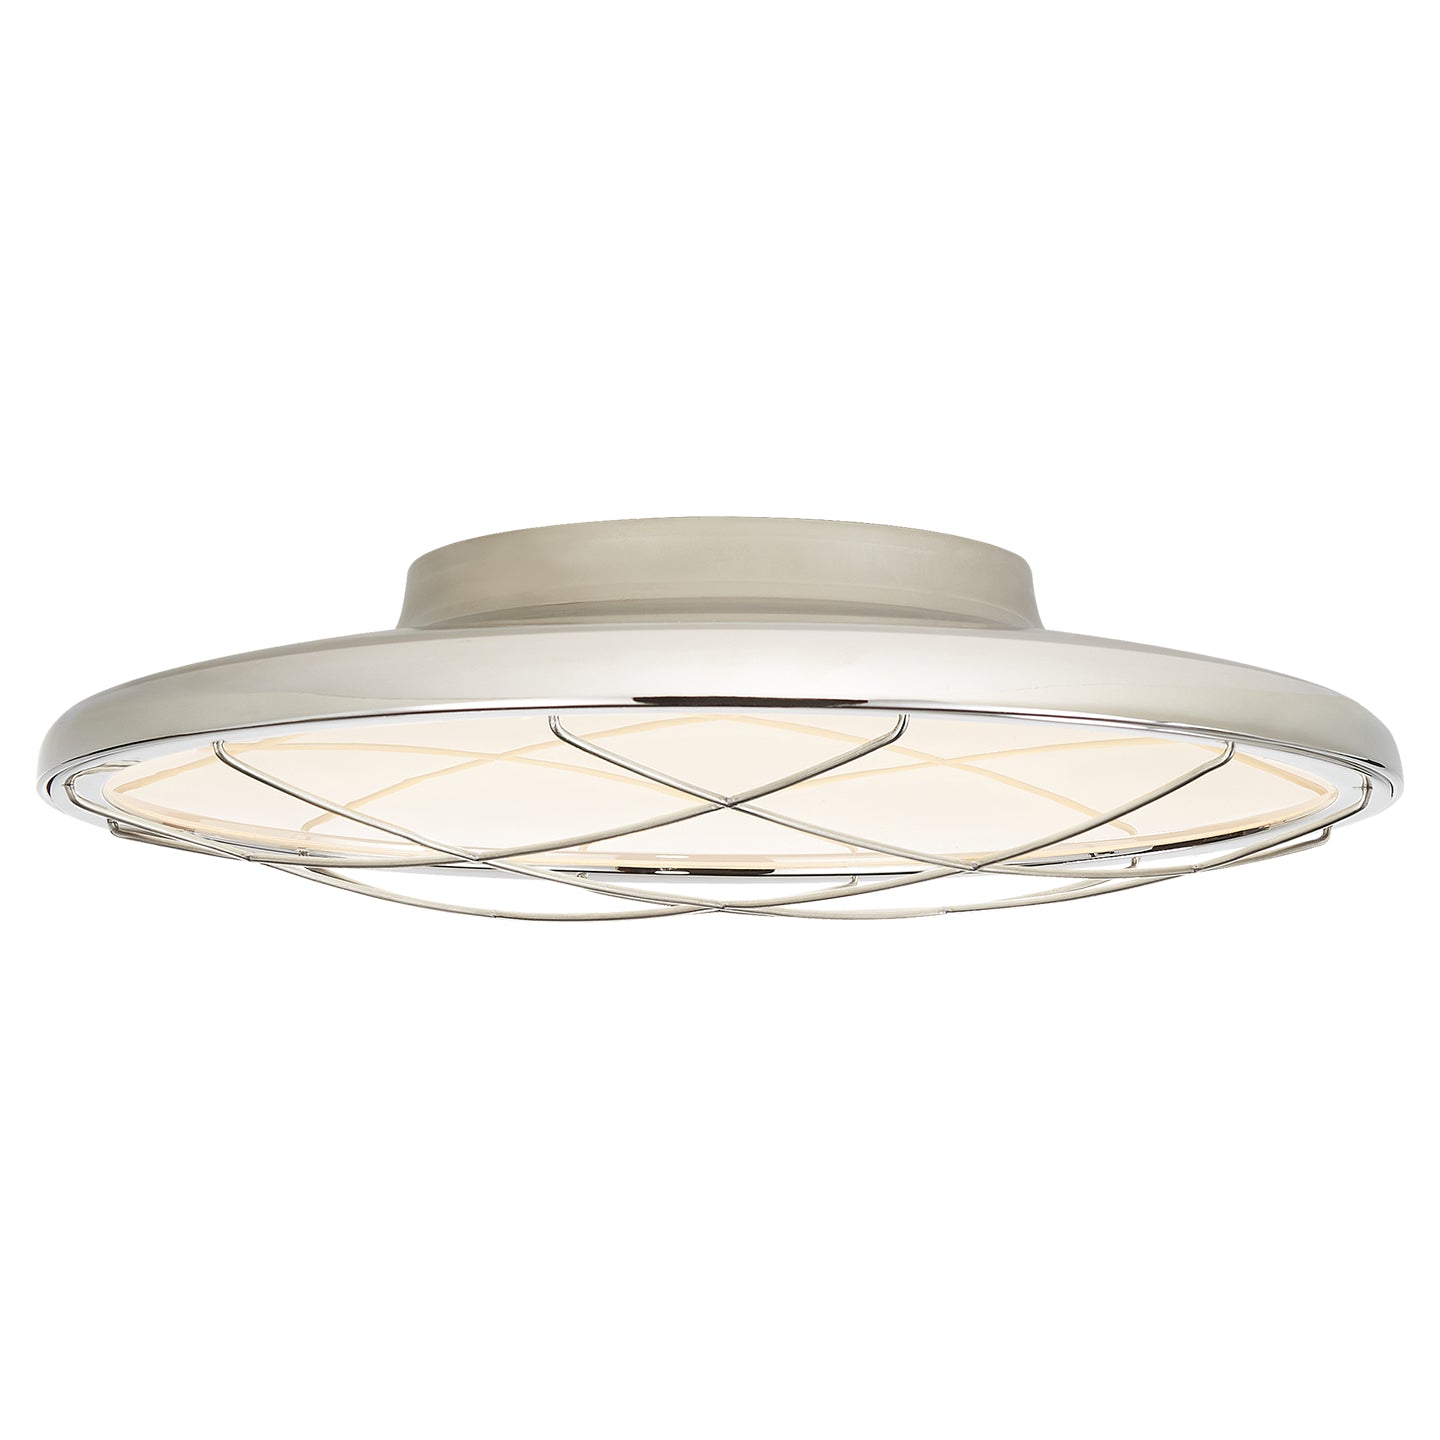 Load image into Gallery viewer, Visual Comfort Signature - PB 4001PN - LED Flush Mount - Dot - Polished Nickel
